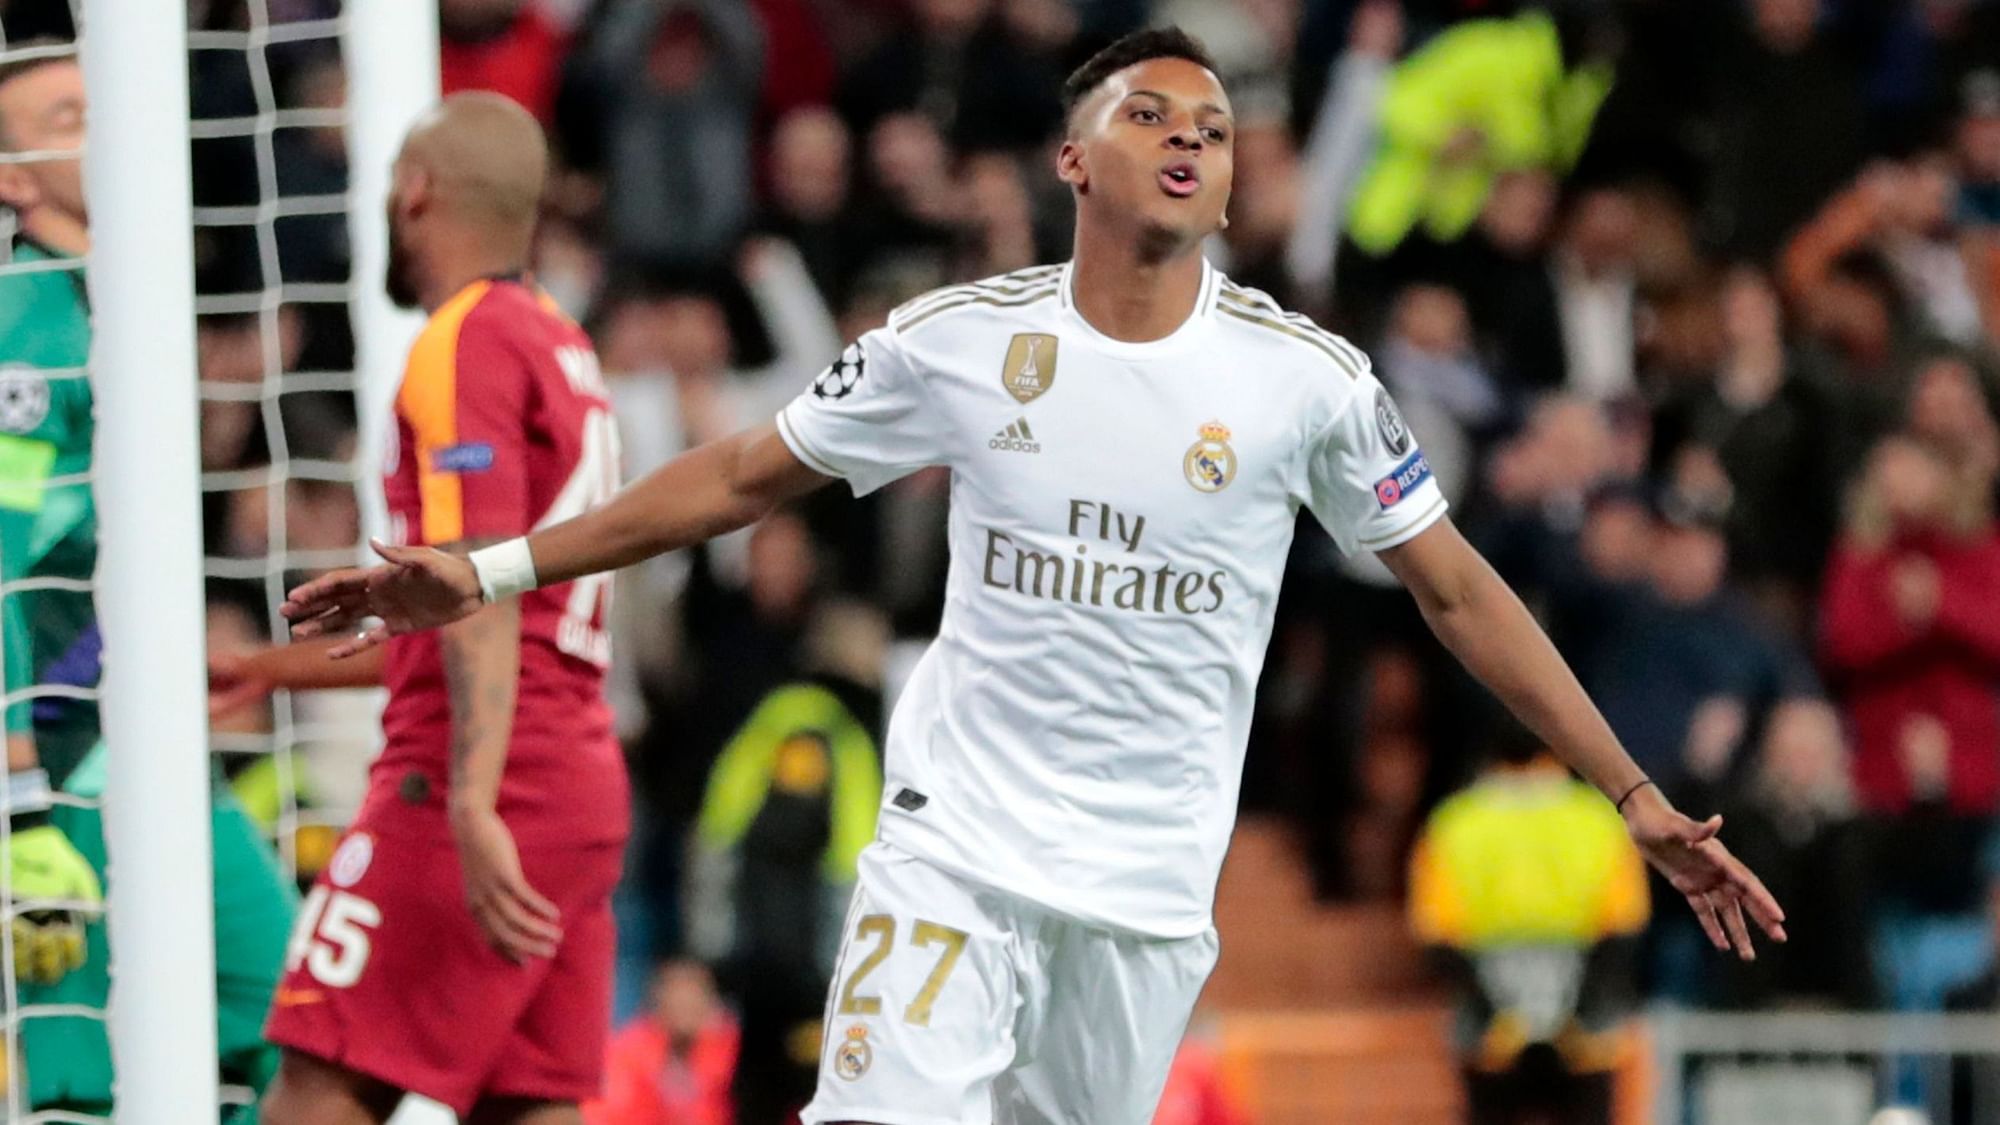 Rodrygo celebrates after scoring against Galatasaray in the Champion League.